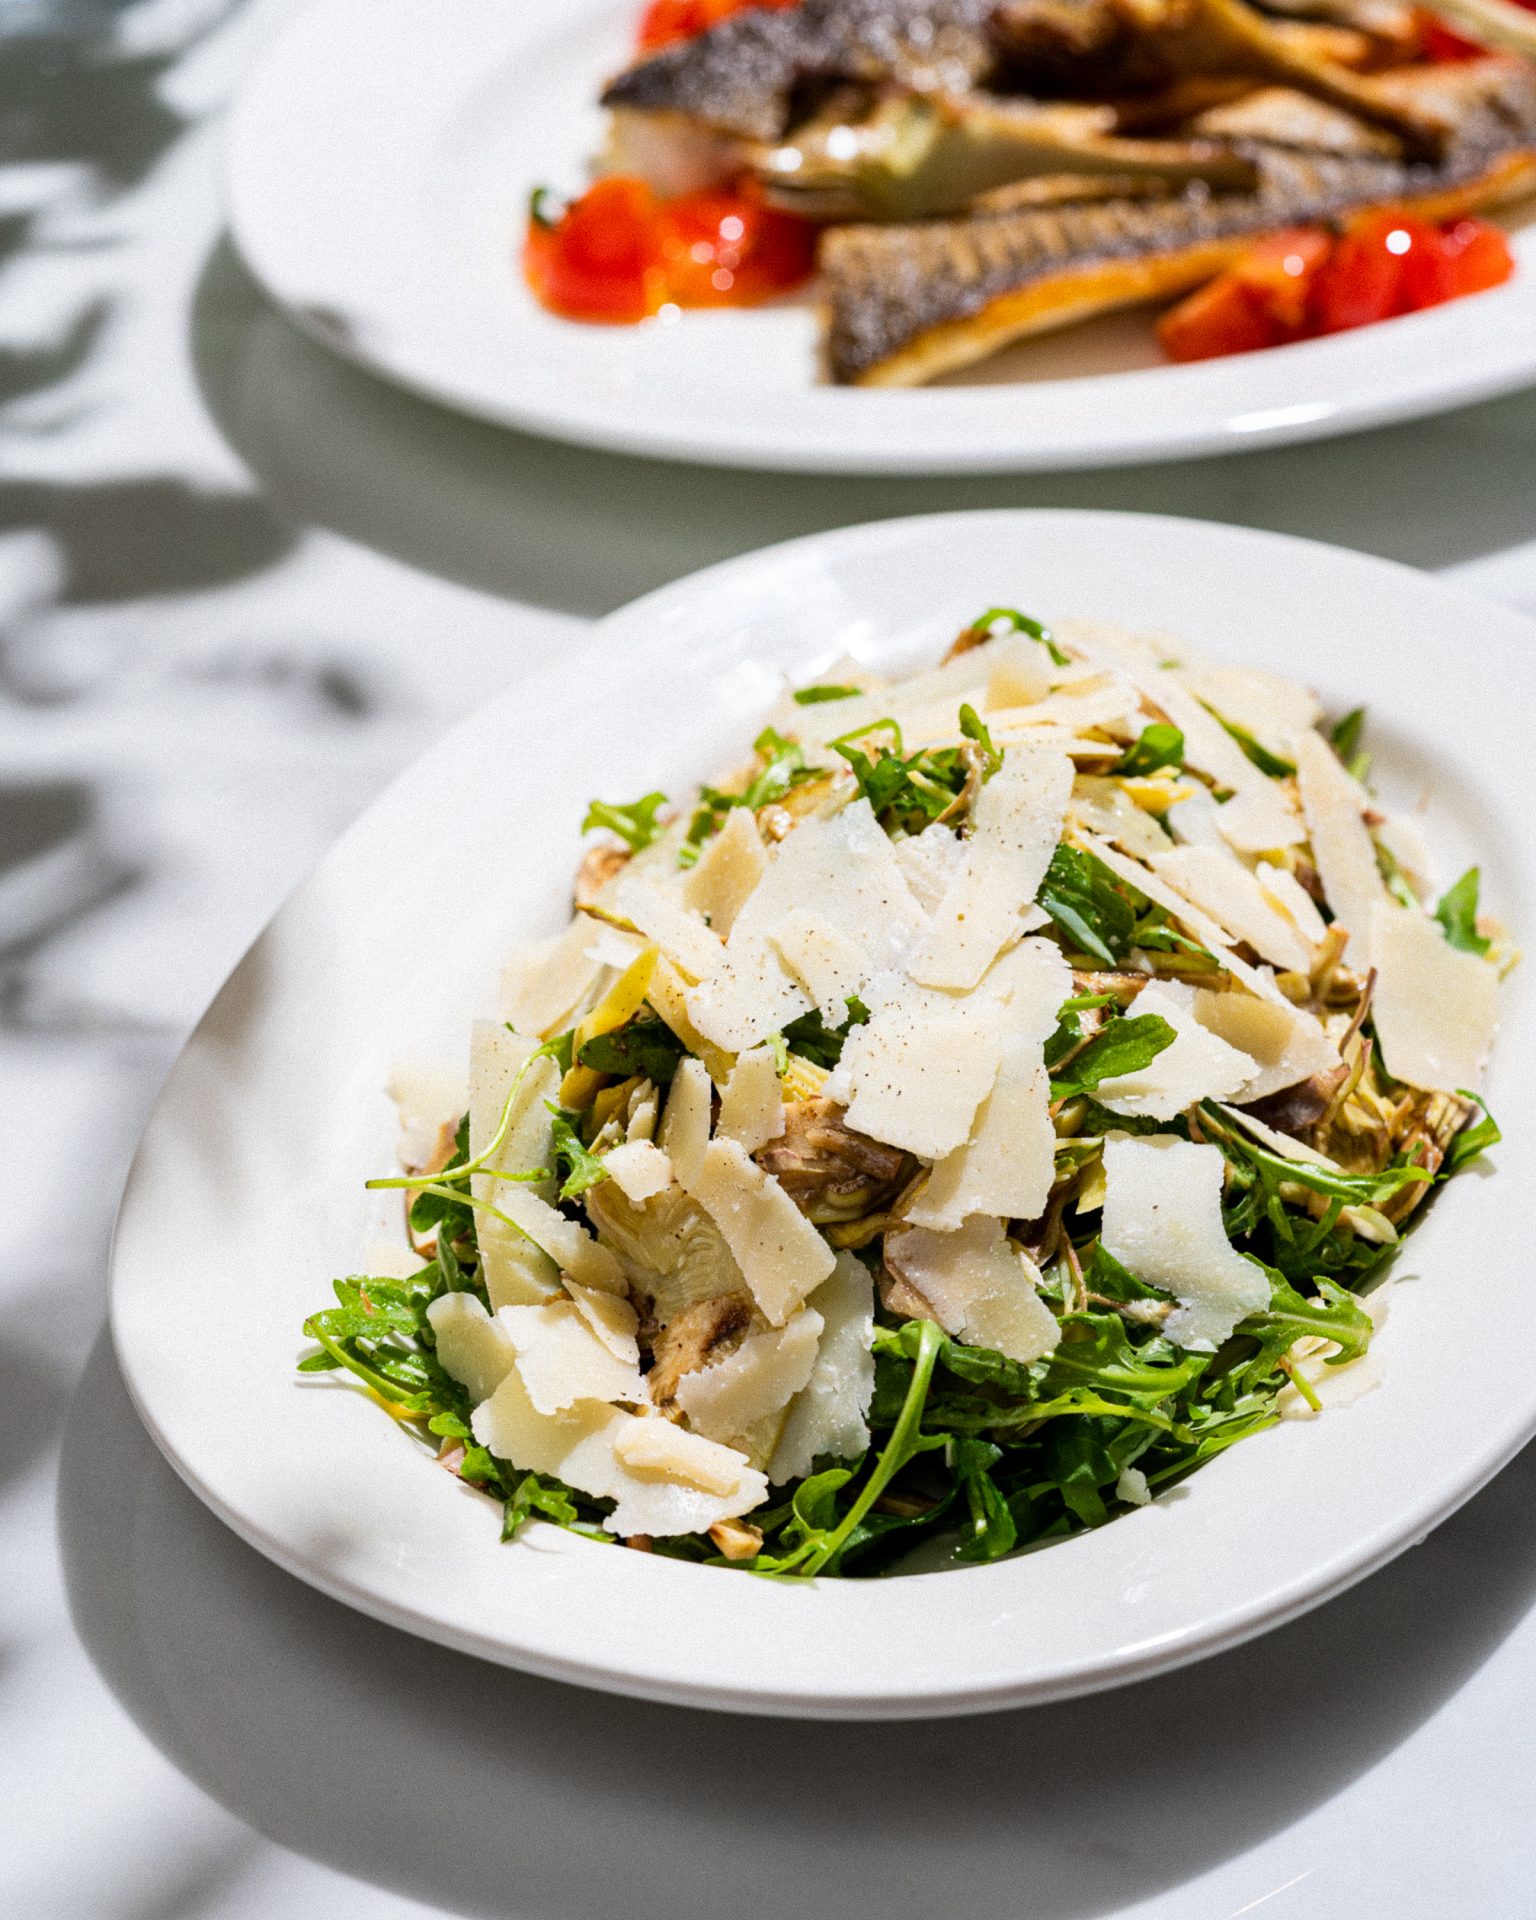 Delicious Artichoke salad with shaved parmesan cheese served by Le Comptoir De Nicole - Fancy Restaurant at Jeddah Yacht Club